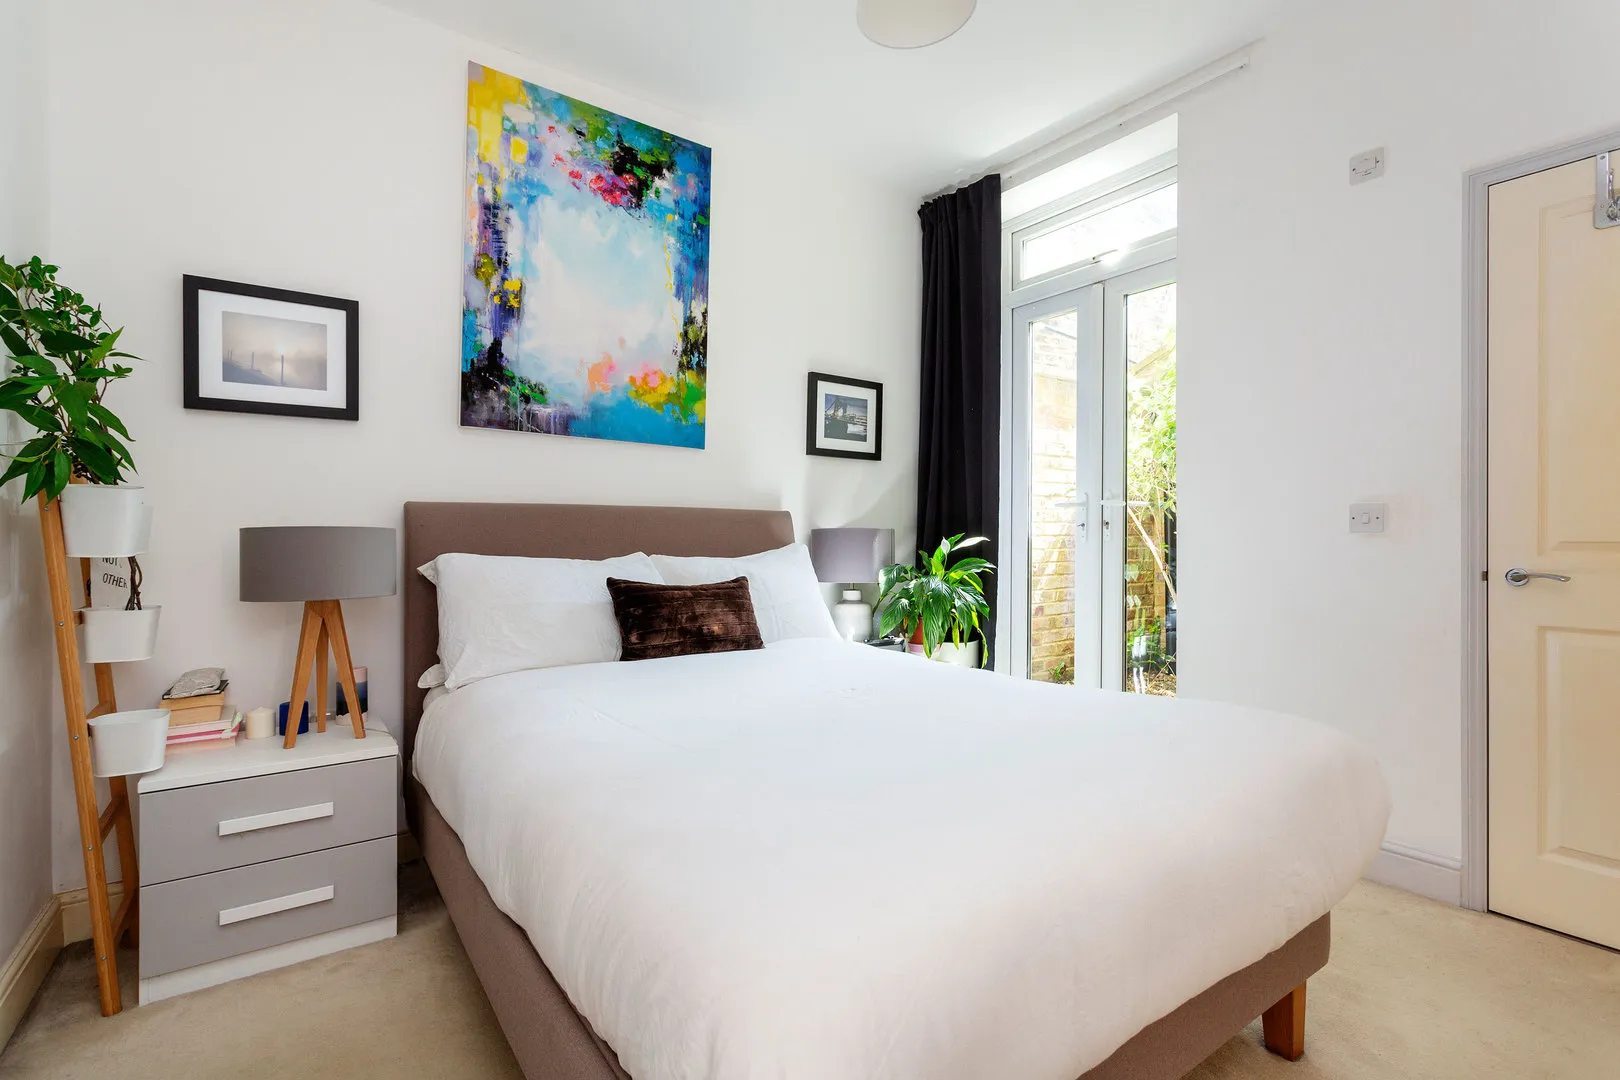 Verbena Gardens, holiday home in Chiswick, London